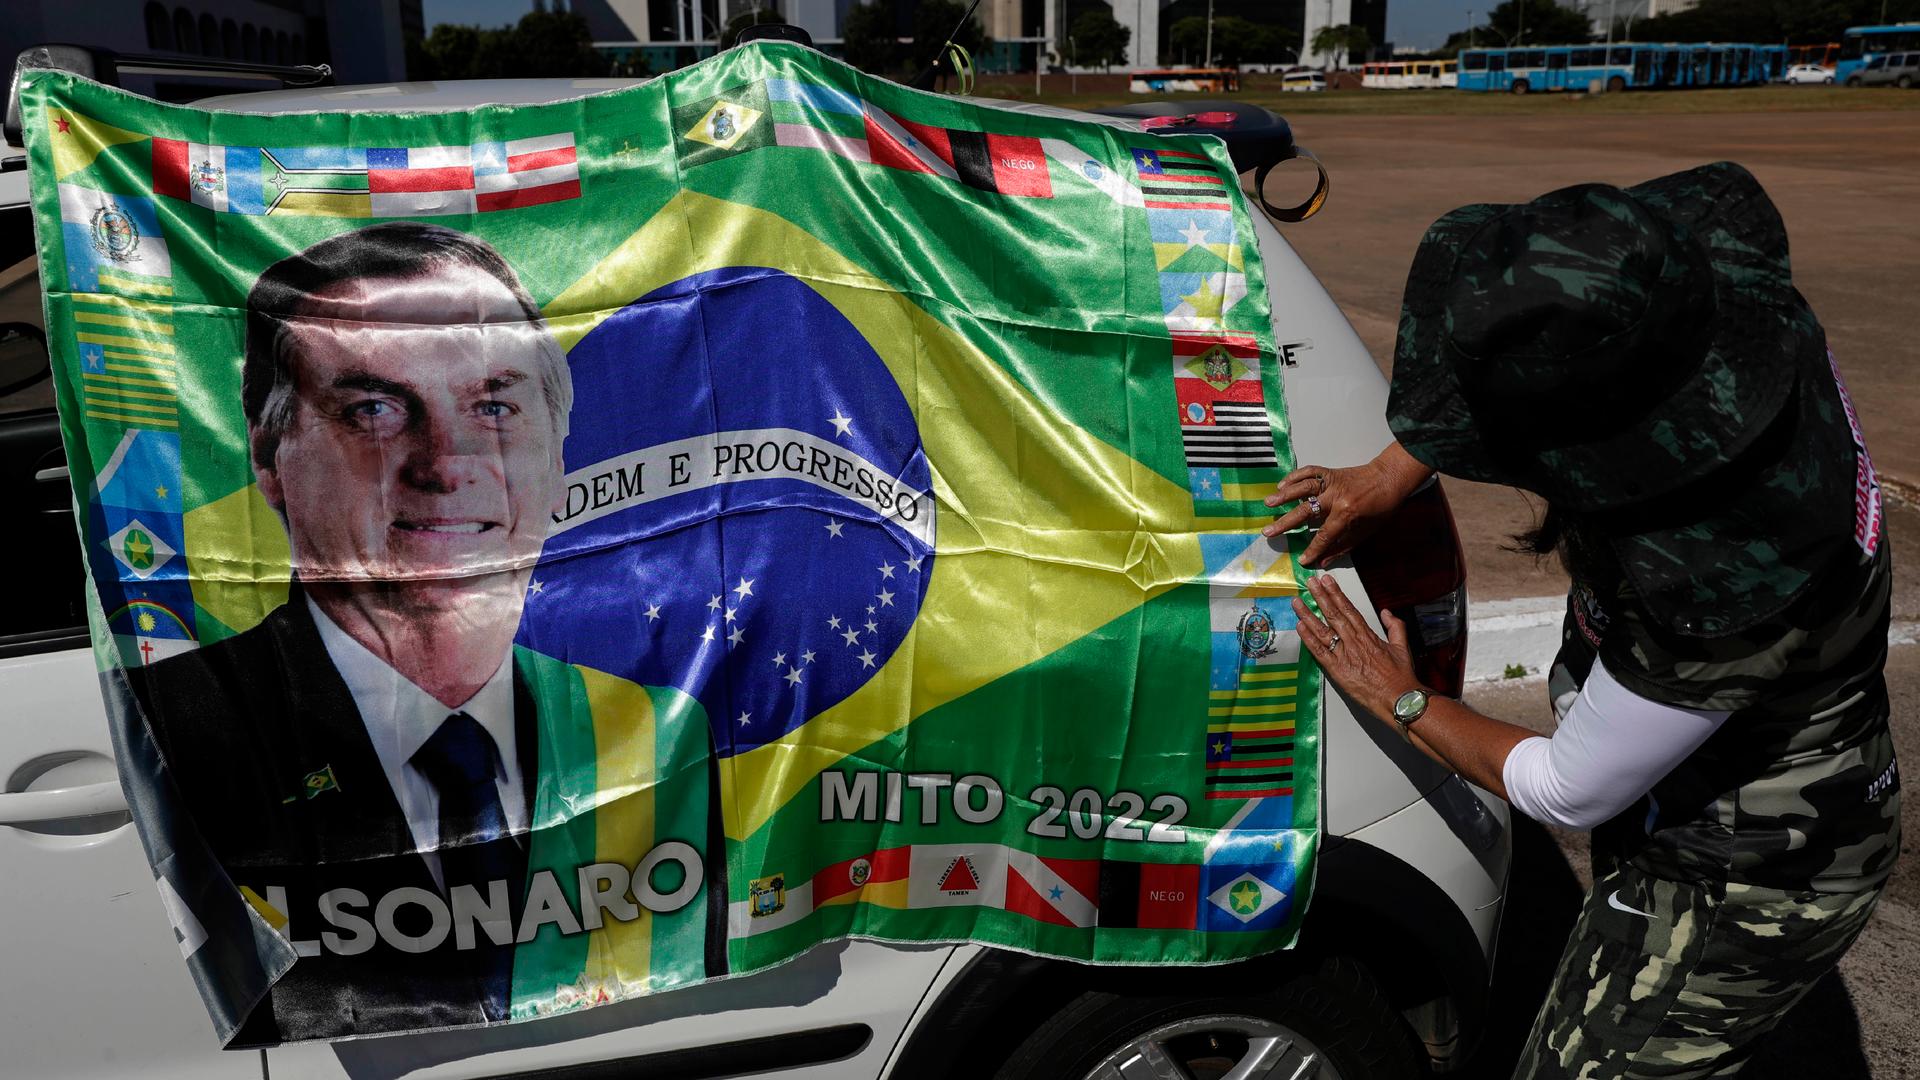 A supporter of Brazilian President Jair Bolsonaro places his image on a car.